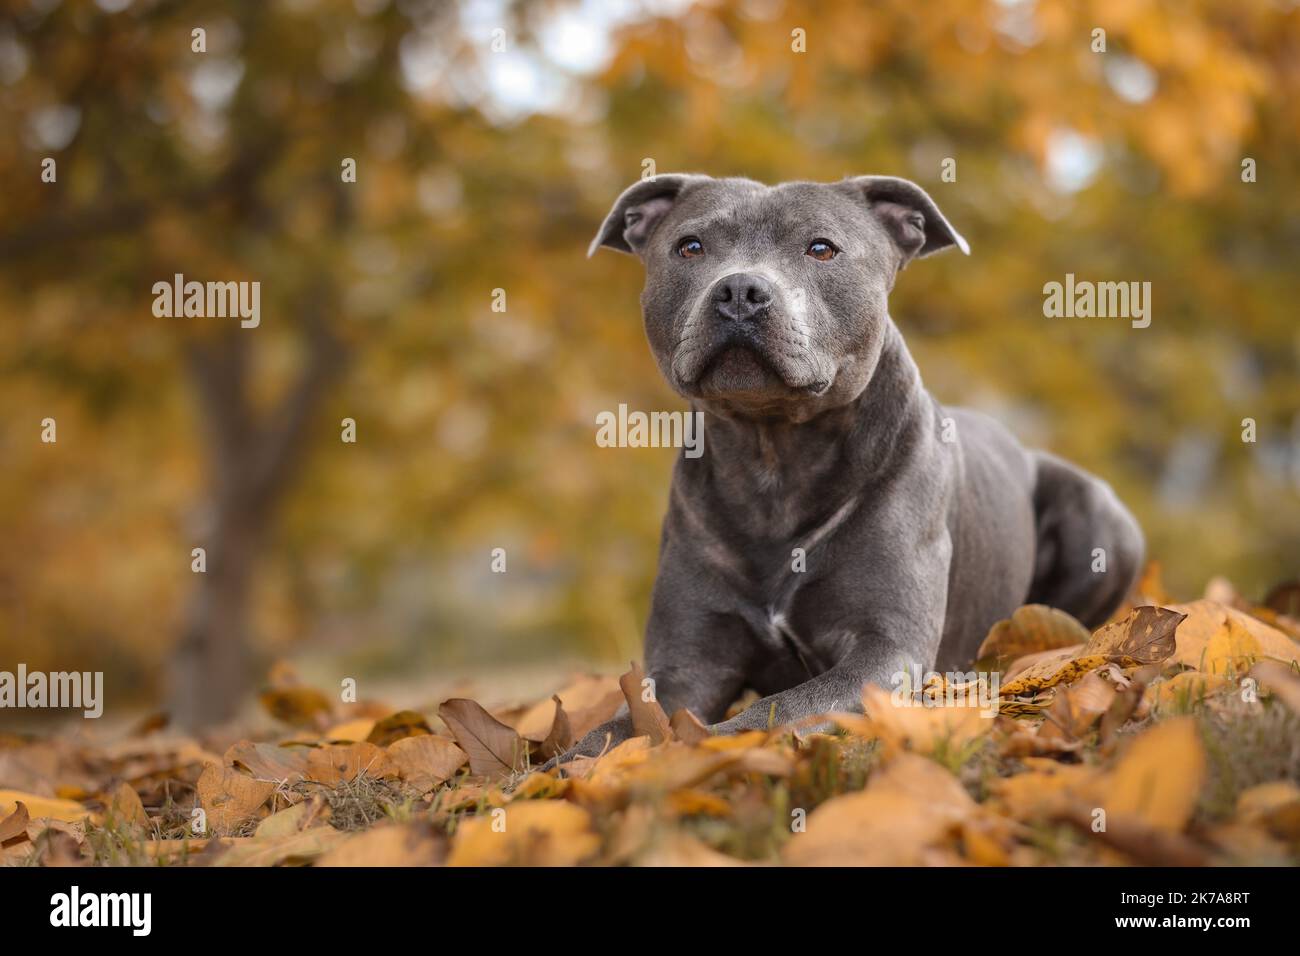 Autumn Portrait of Blue Staffy in Fallen Leaves. Shallow Depth of Field of English Staffordshire Bull Terrier Dog Lying Down in October Nature. Stock Photo